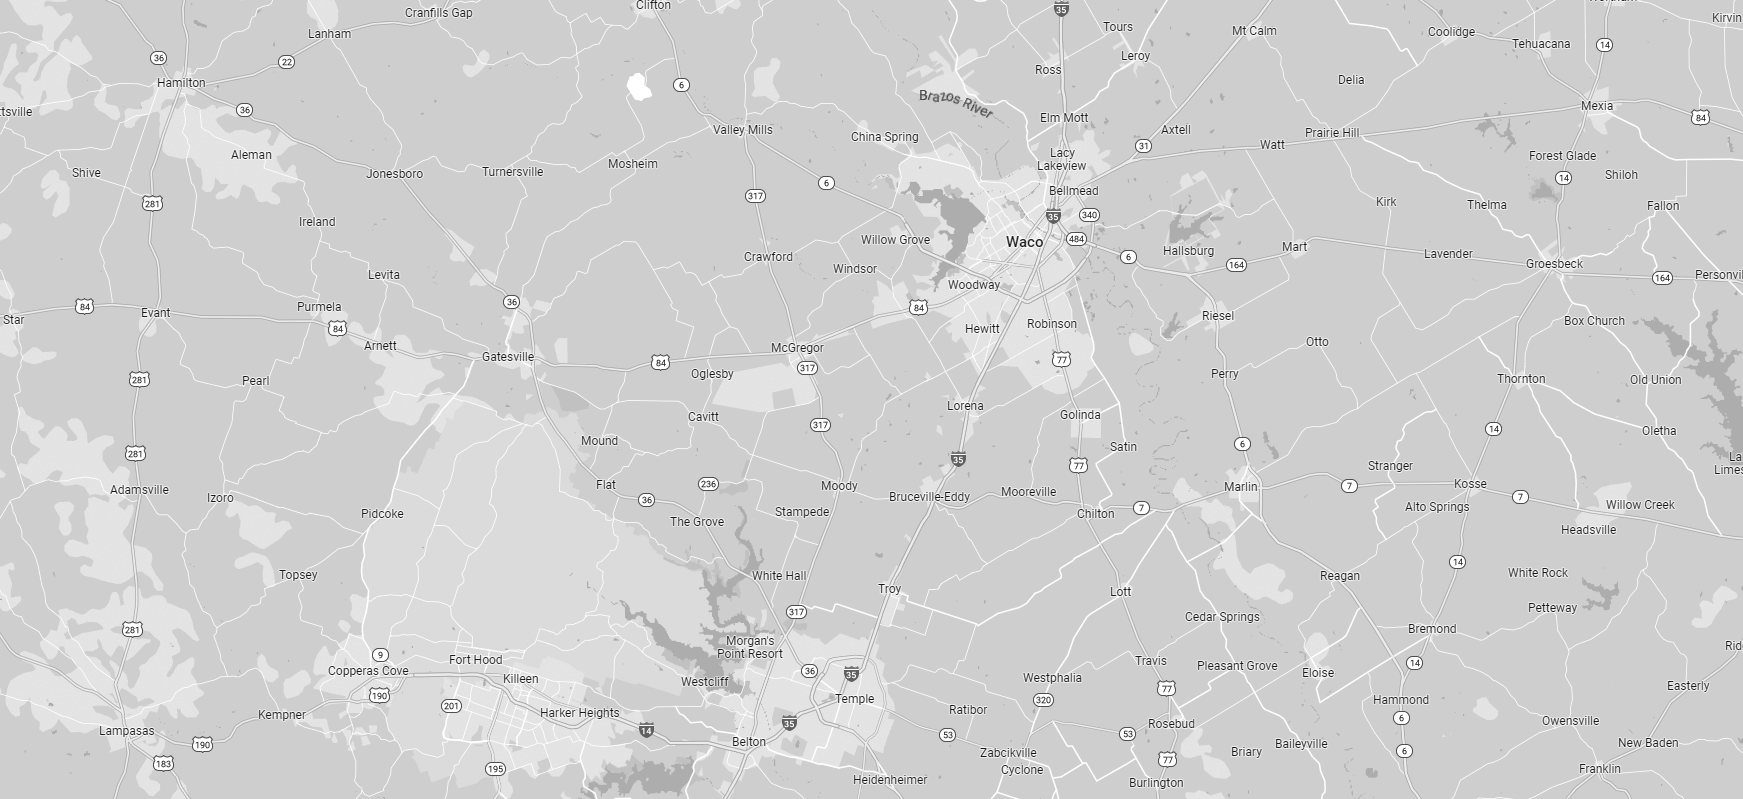 Waco, Texas area map background in grayscale.